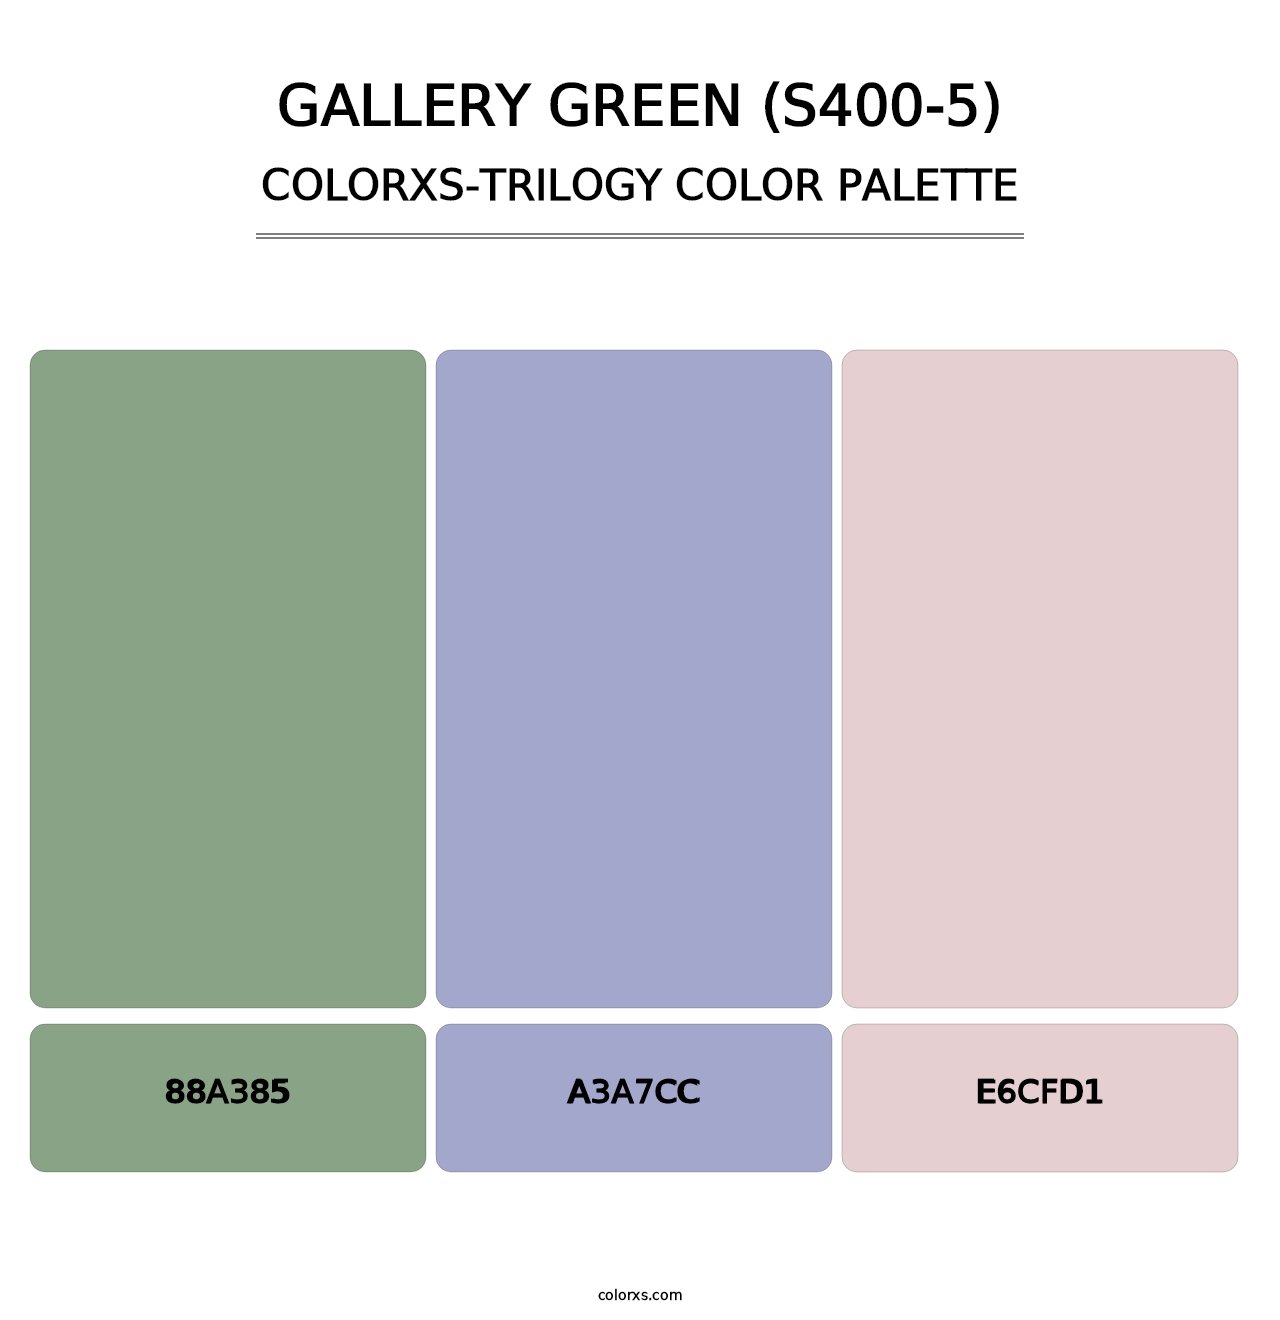 Gallery Green (S400-5) - Colorxs Trilogy Palette